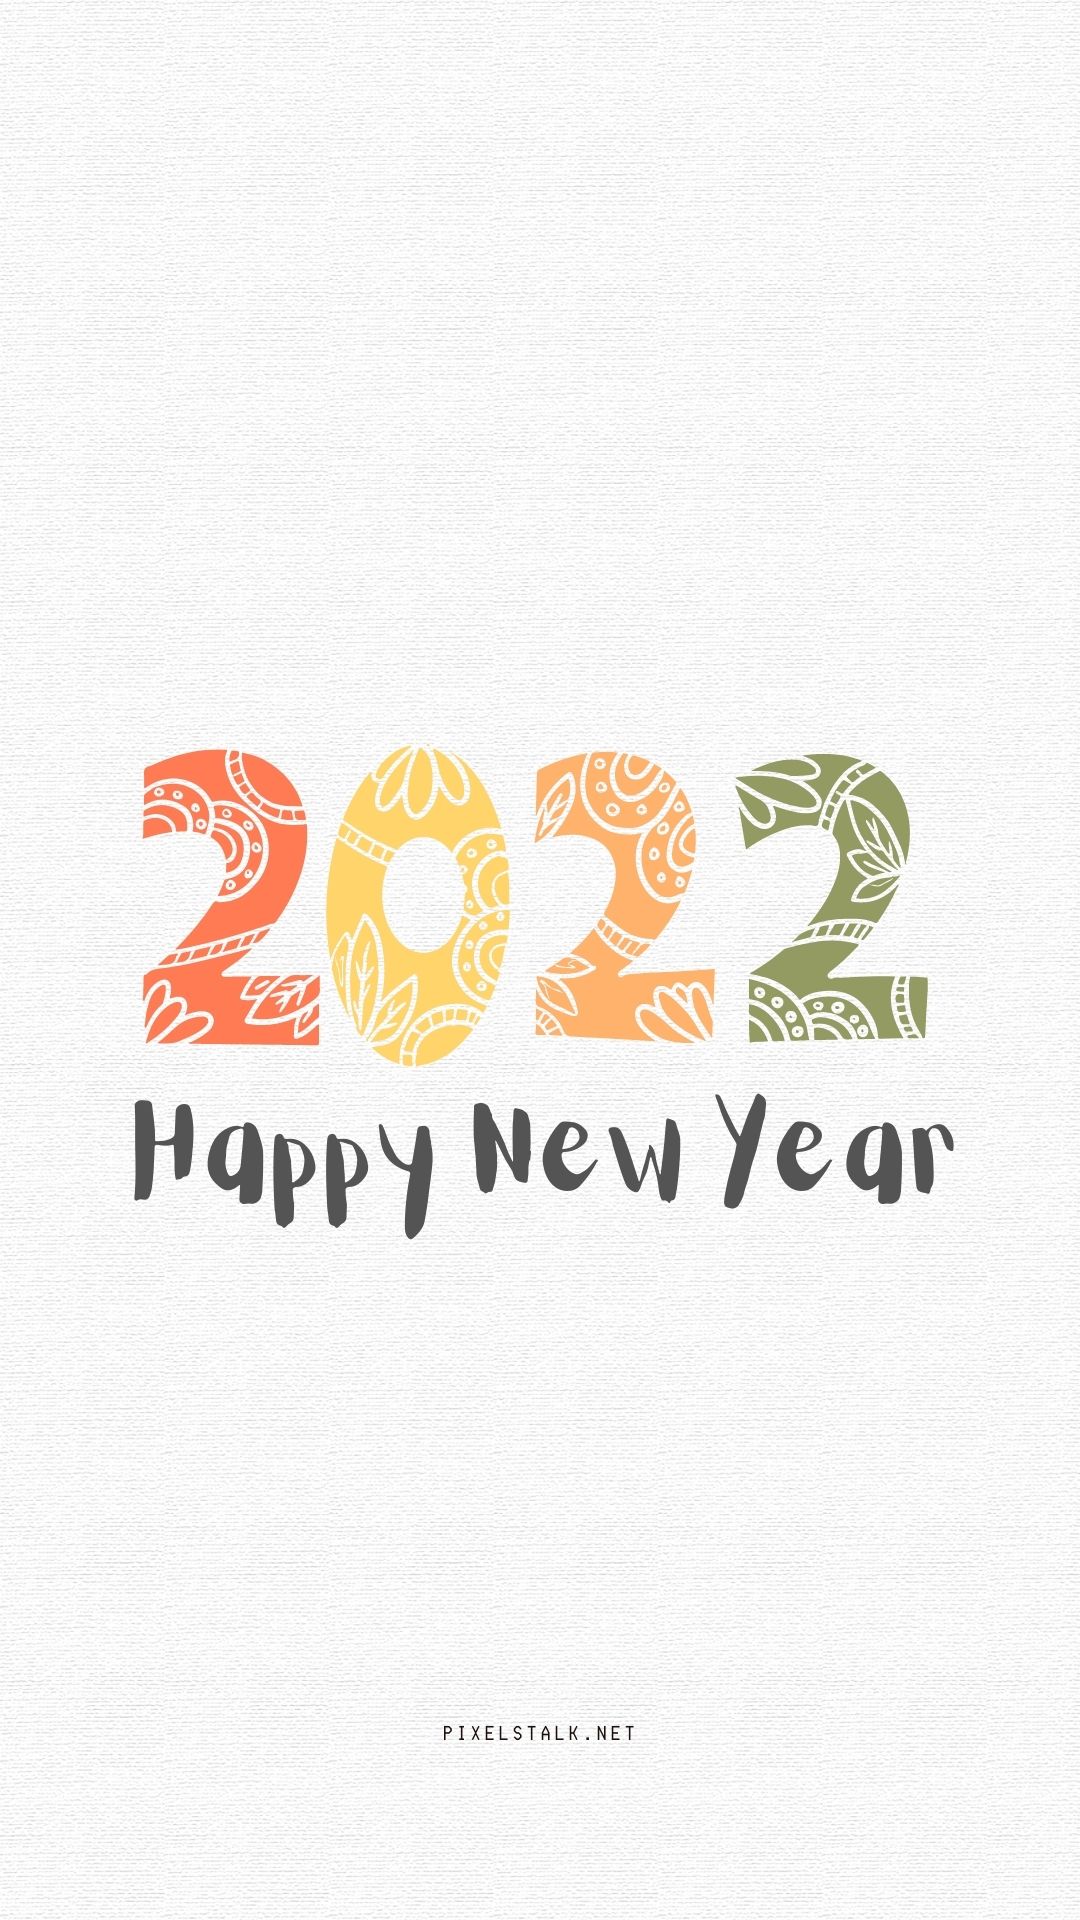 Happy New Year 2022 Yellow Hd Wallpaper For Laptop And Tablet Free Download  : Wallpapers13.com